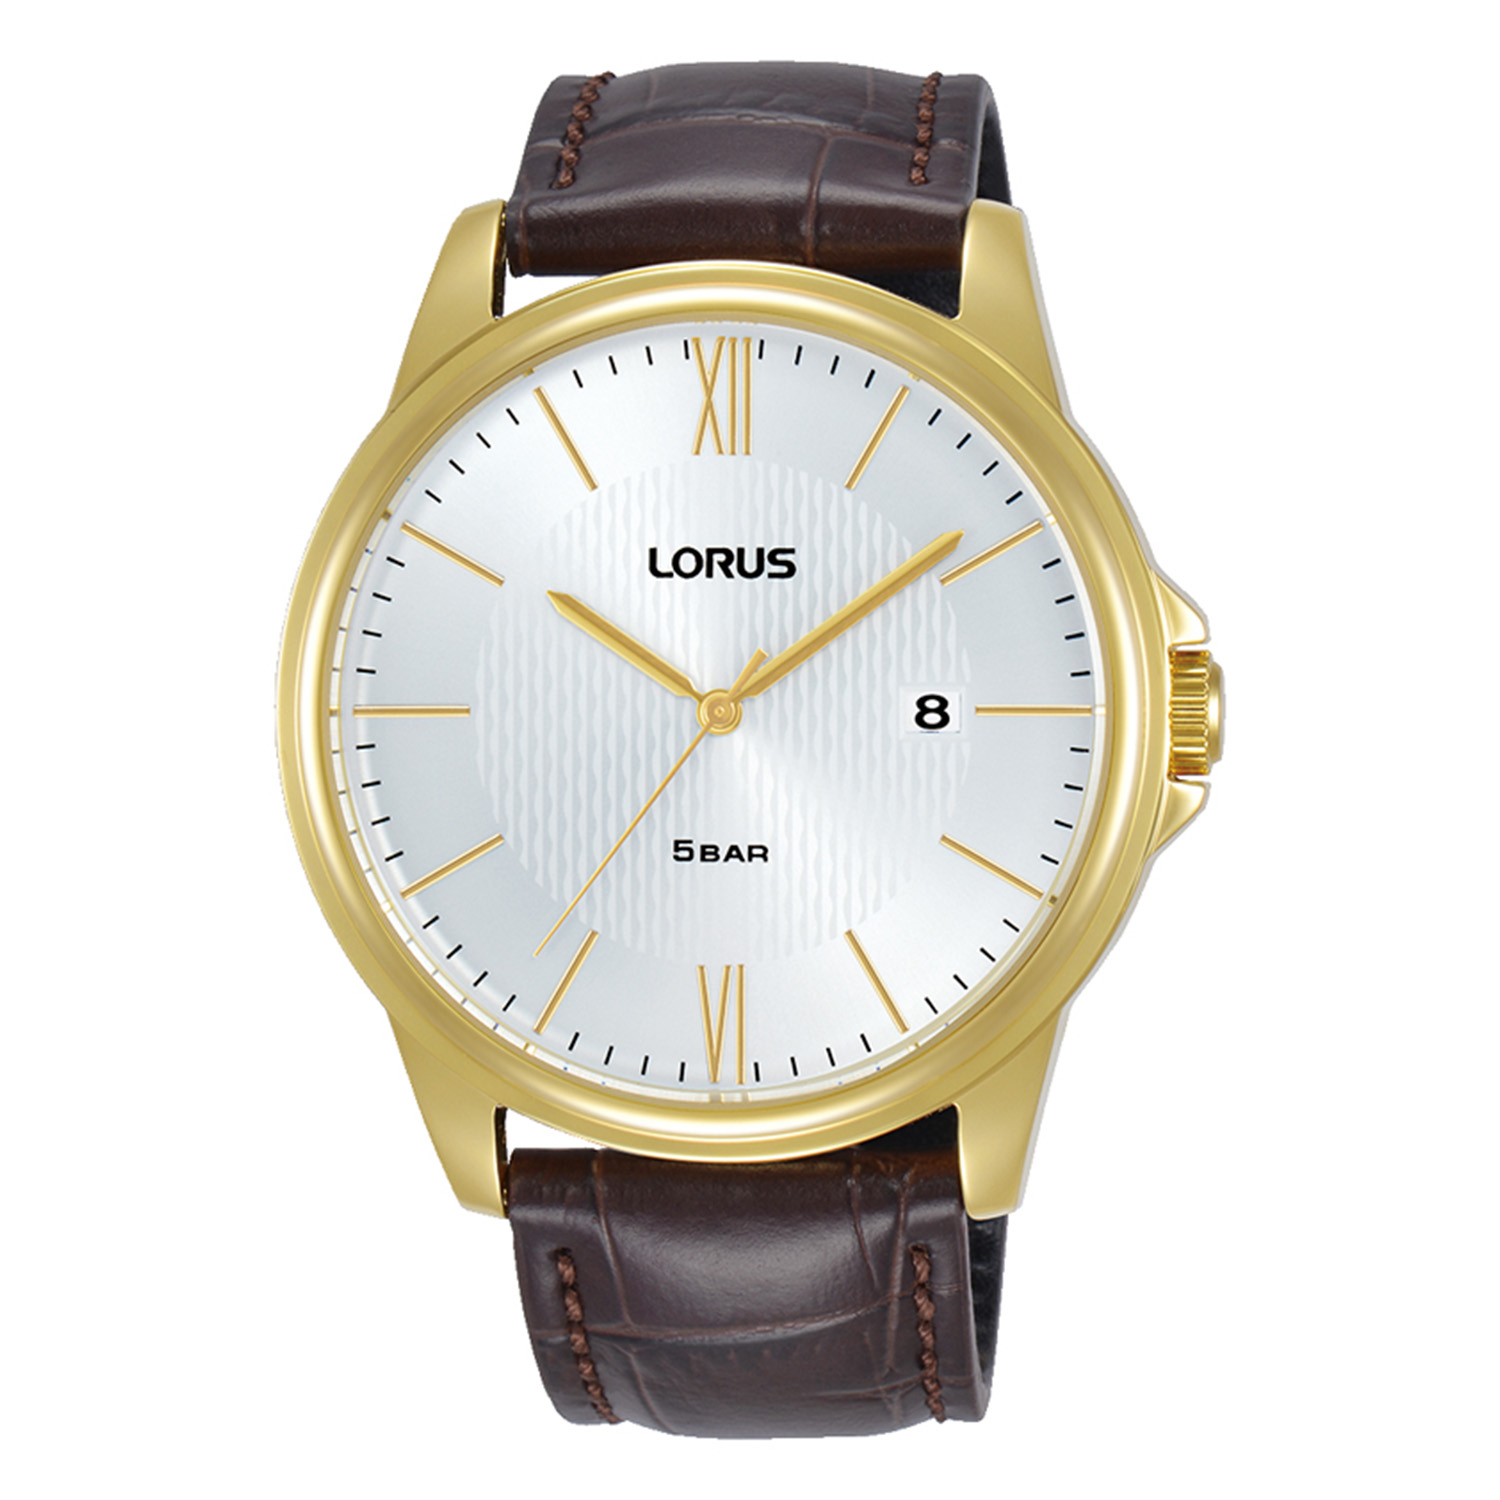 Mens Lorus gold stainless steel watch with white dial and brown leather strap.